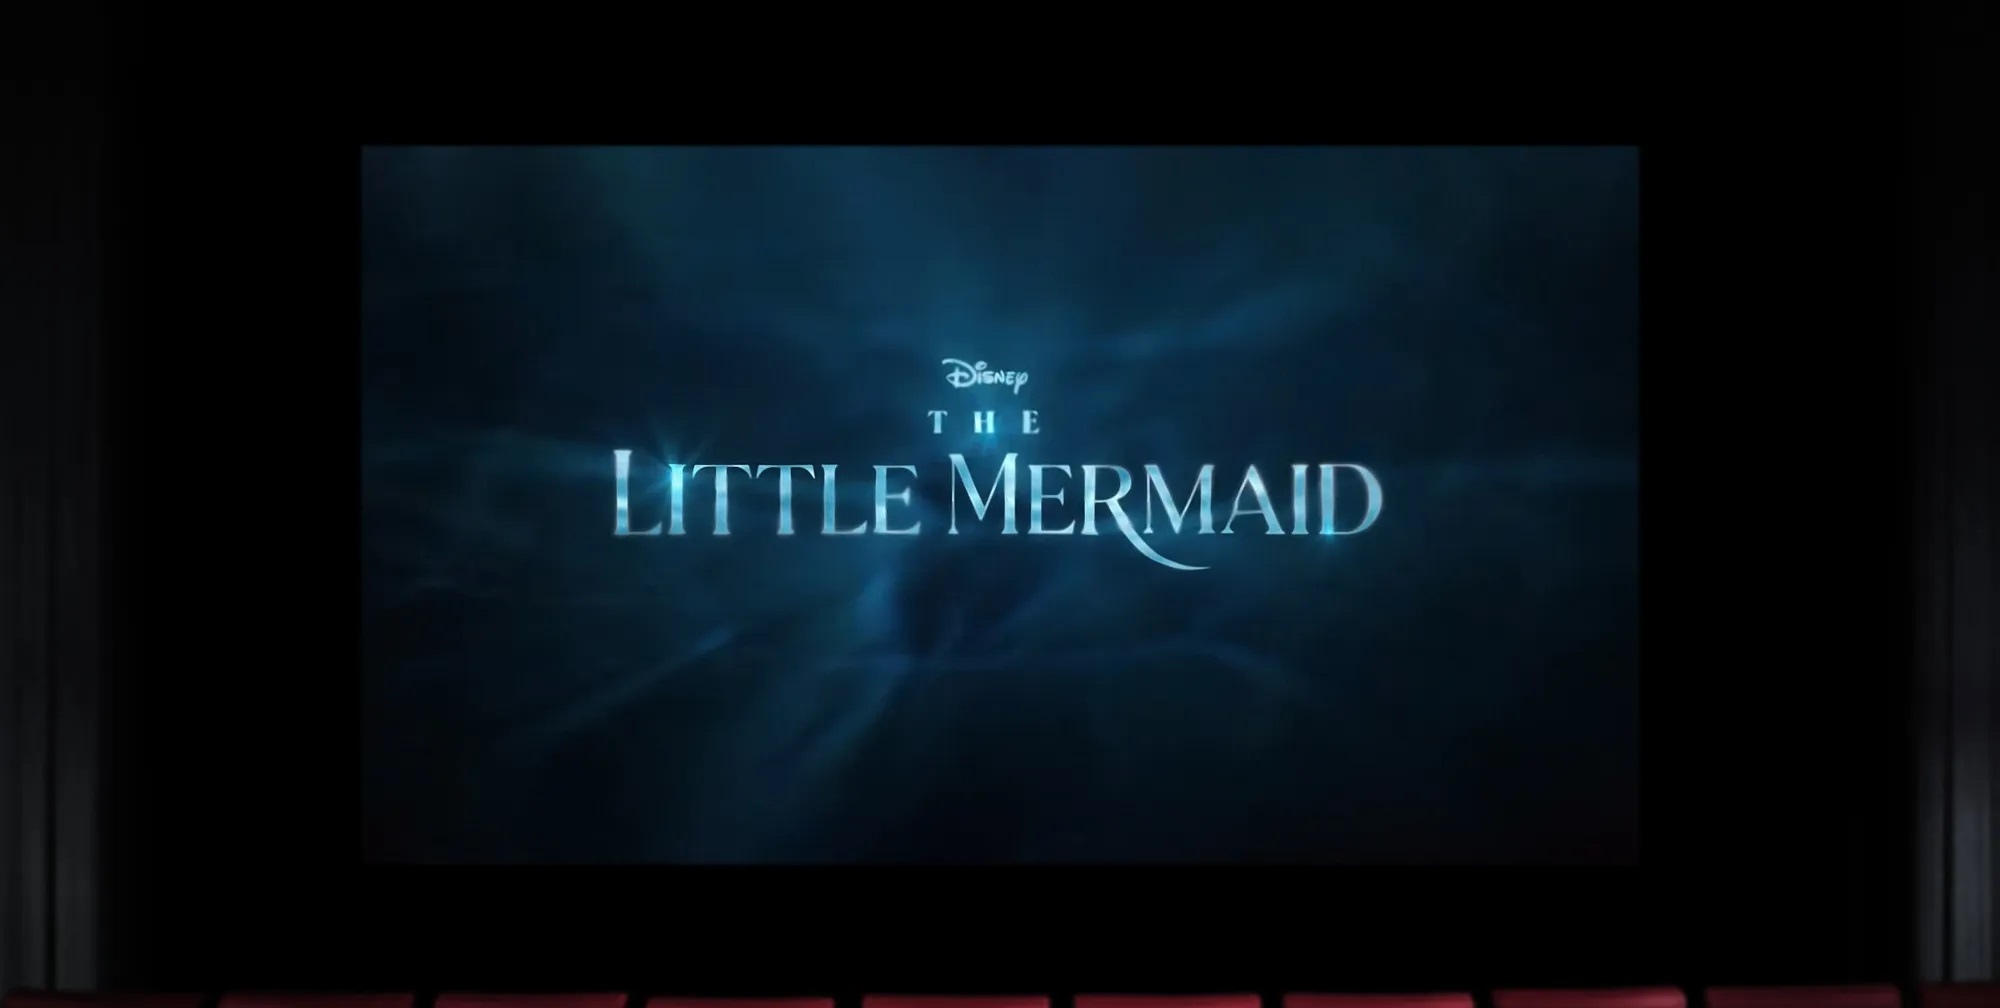 The Little Mermaid grossed more than USD117 million in the US in its opening weekend